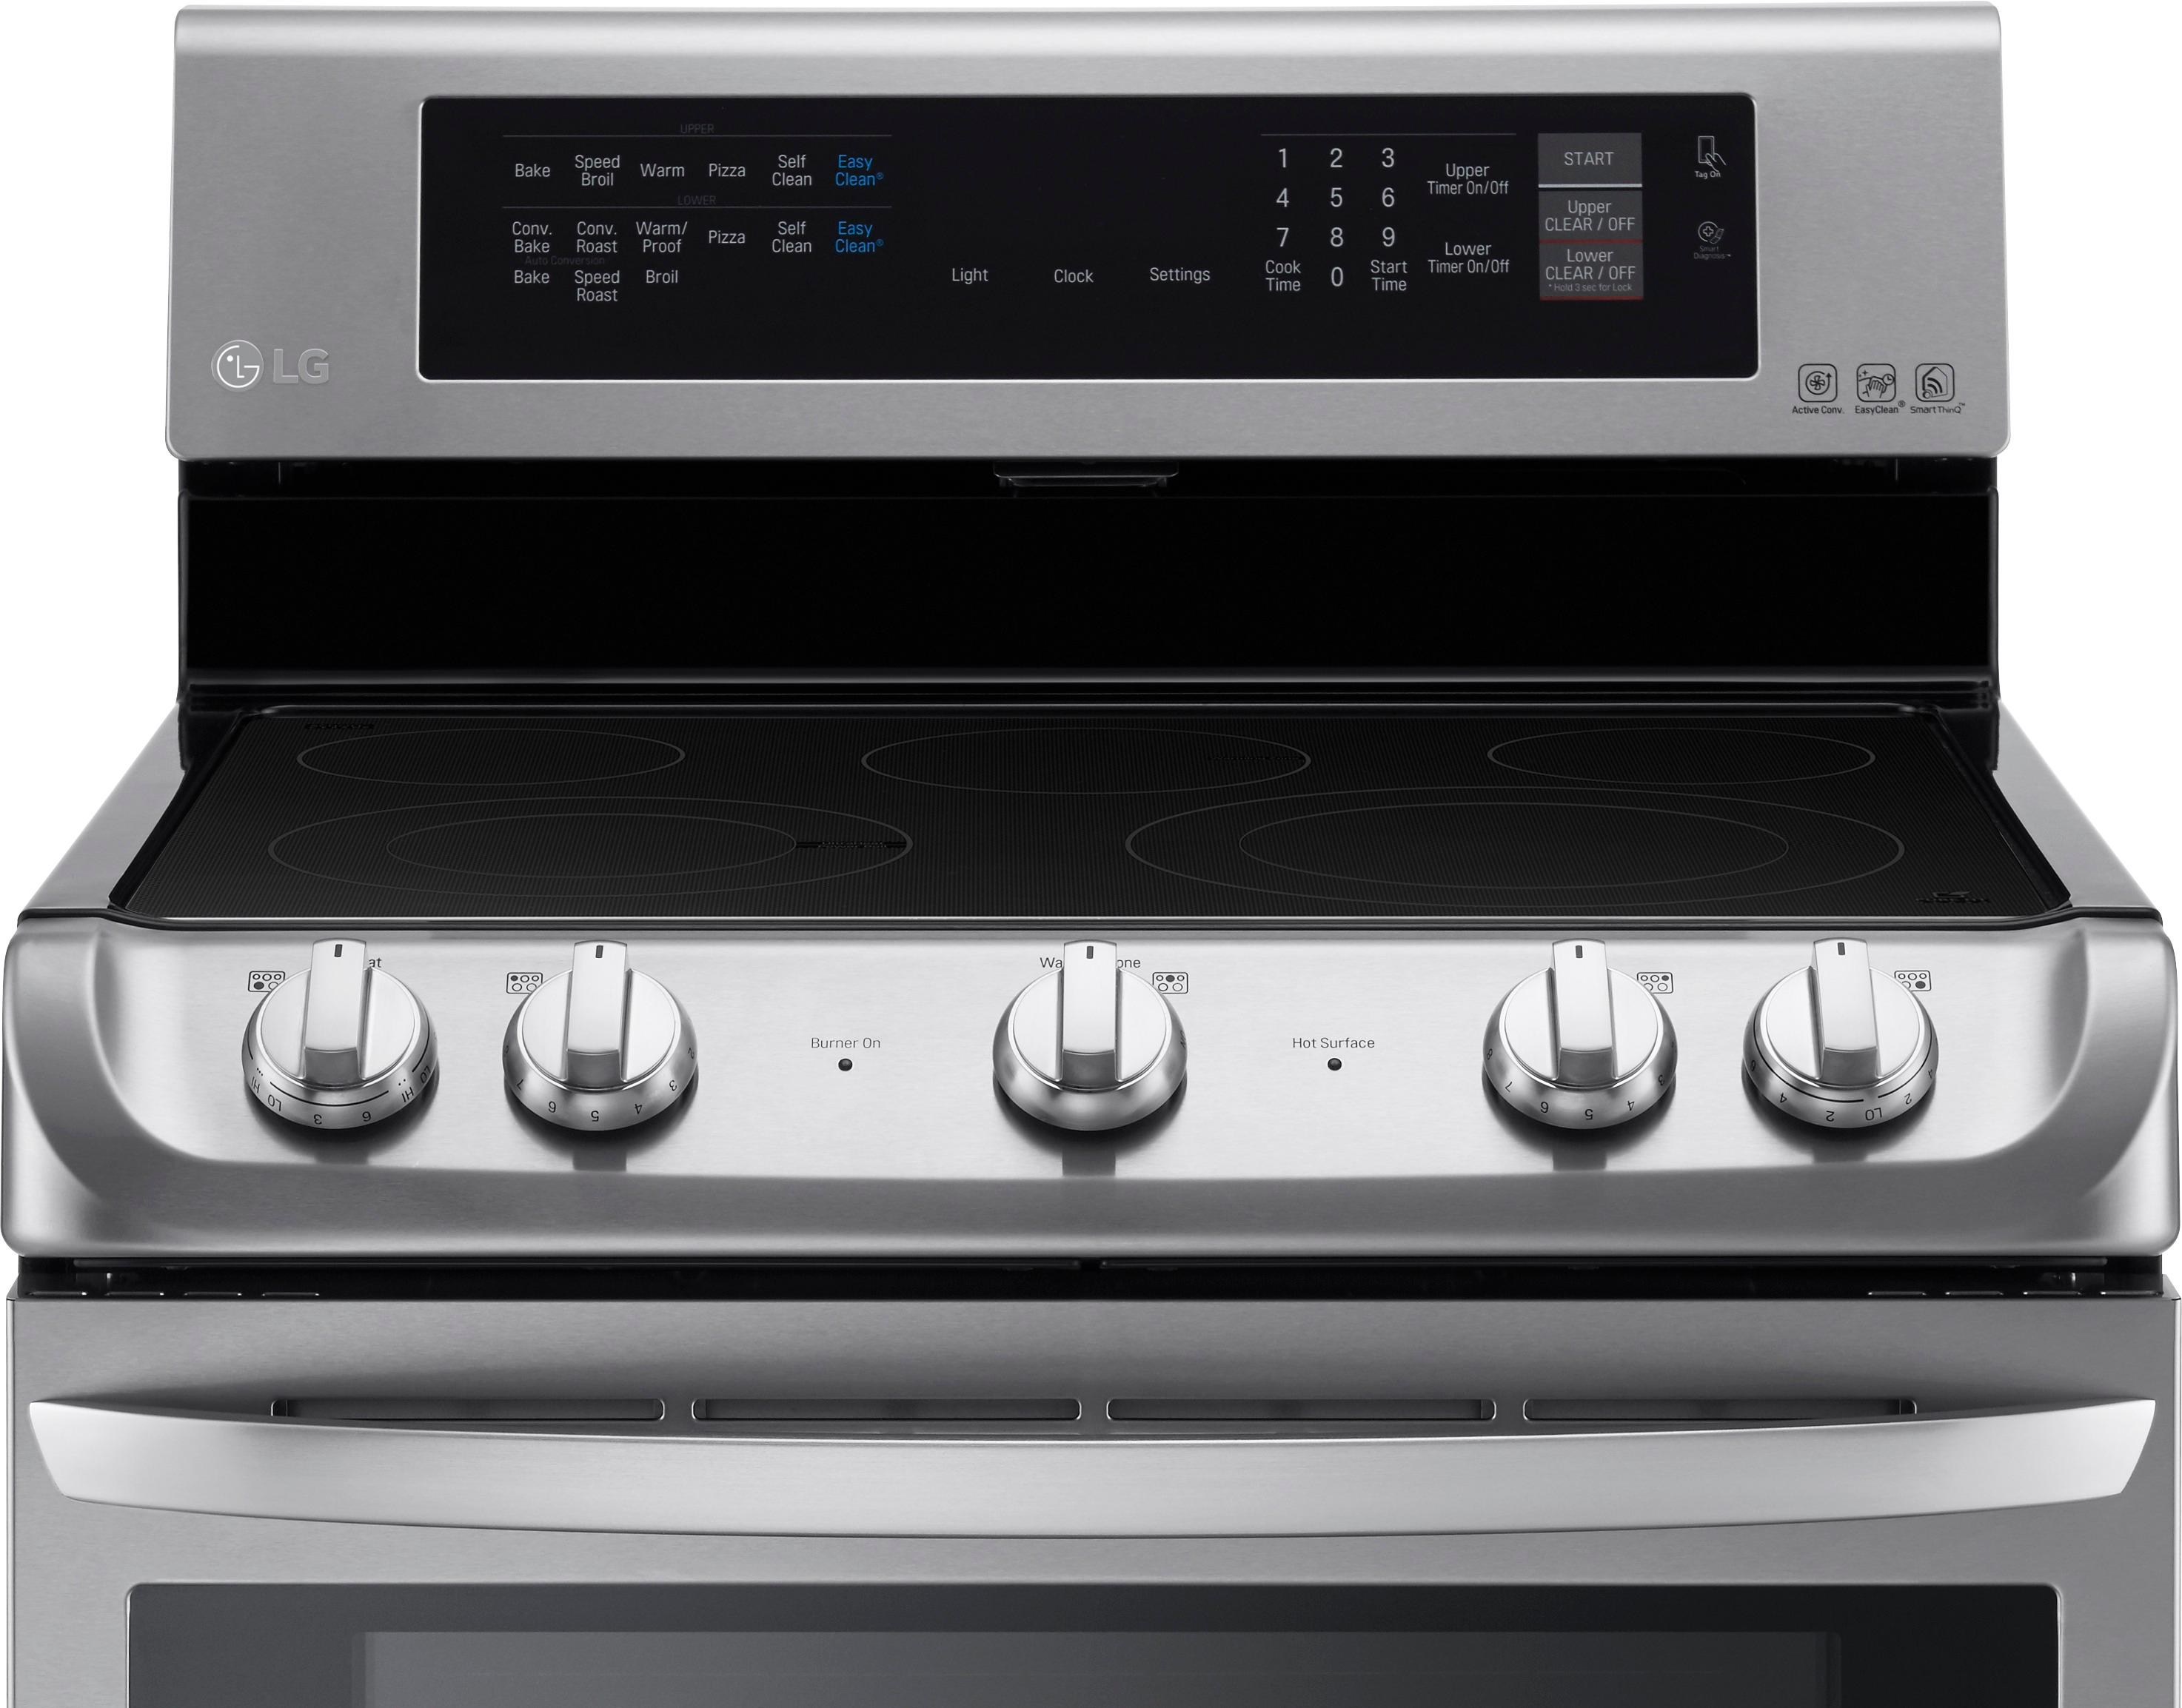 Lg 7 3 Cu Ft Electric Self Cleaning Freestanding Double Oven Range